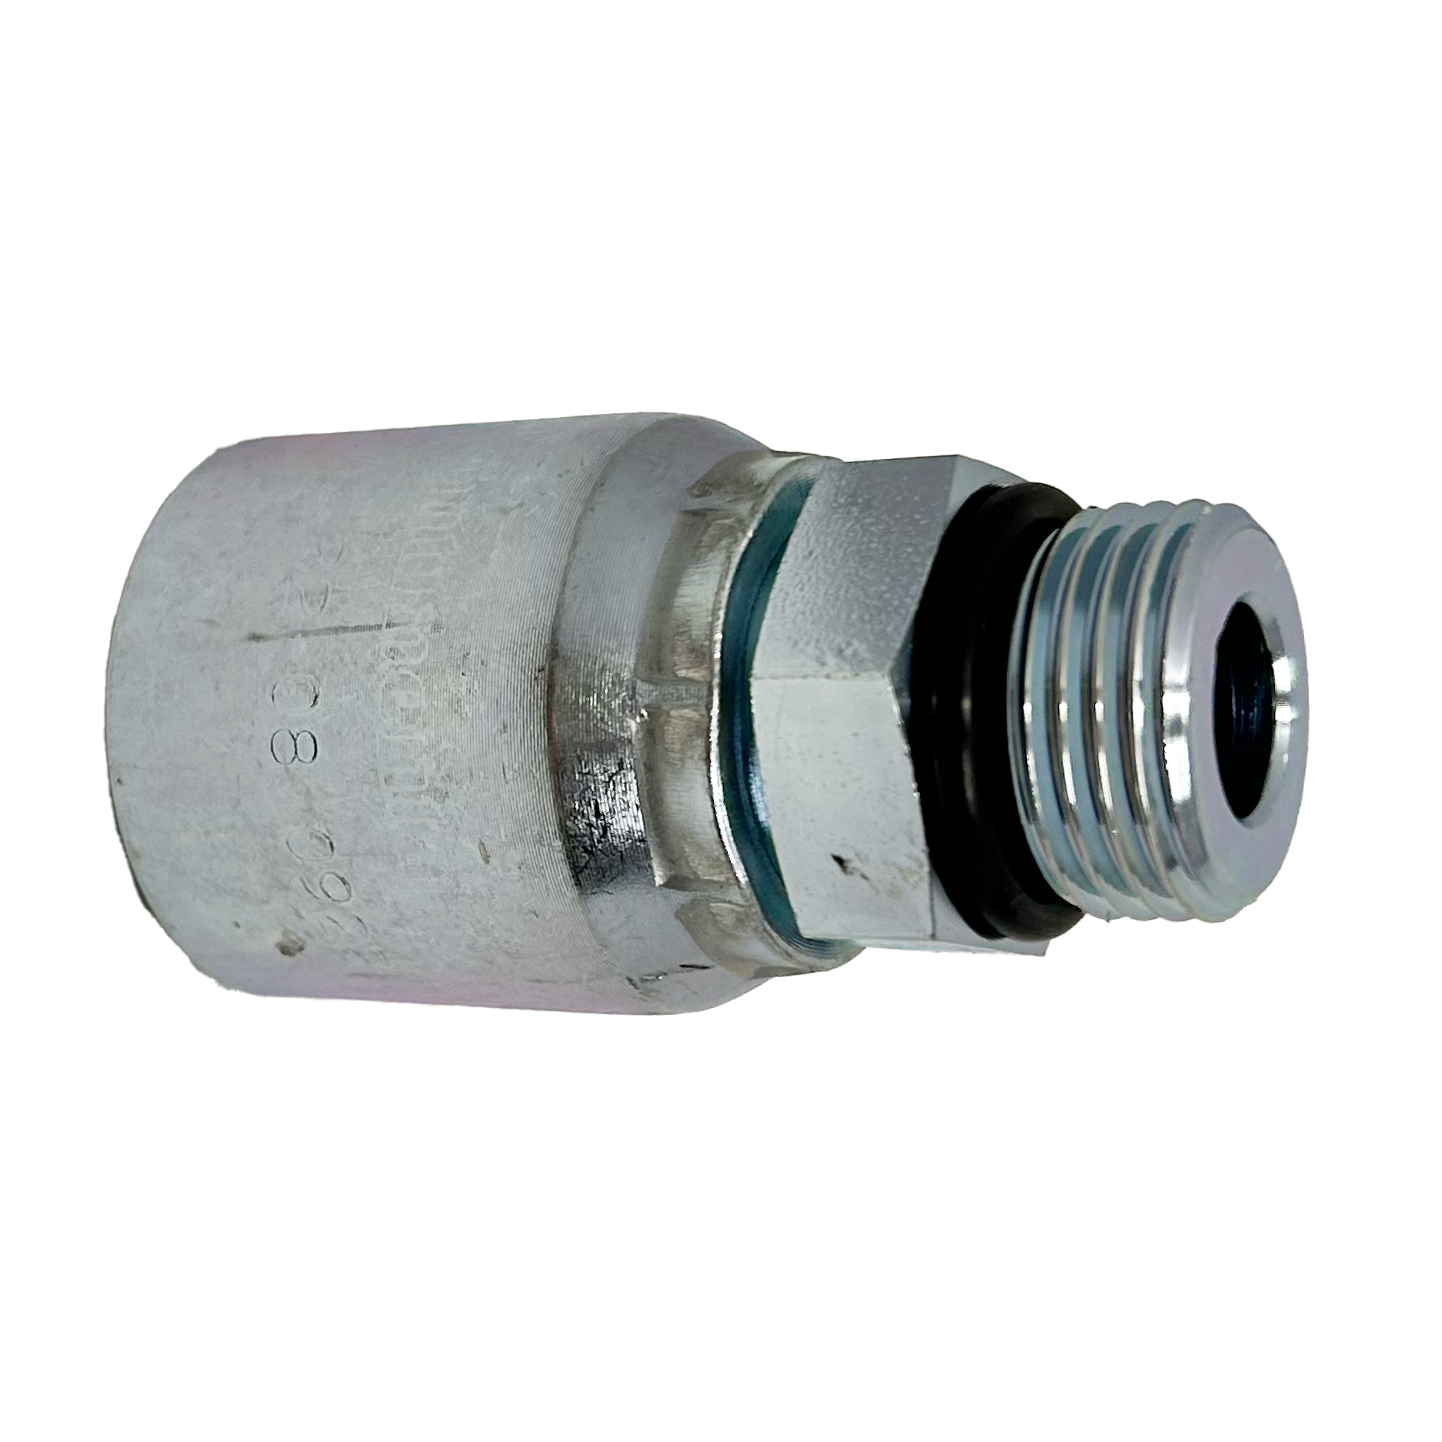 B2-OBM-0808S: Continental Hose Fitting, 0.5 (1/2") Hose ID x 3/4-16 Male ORB, Straight Rigid Connection